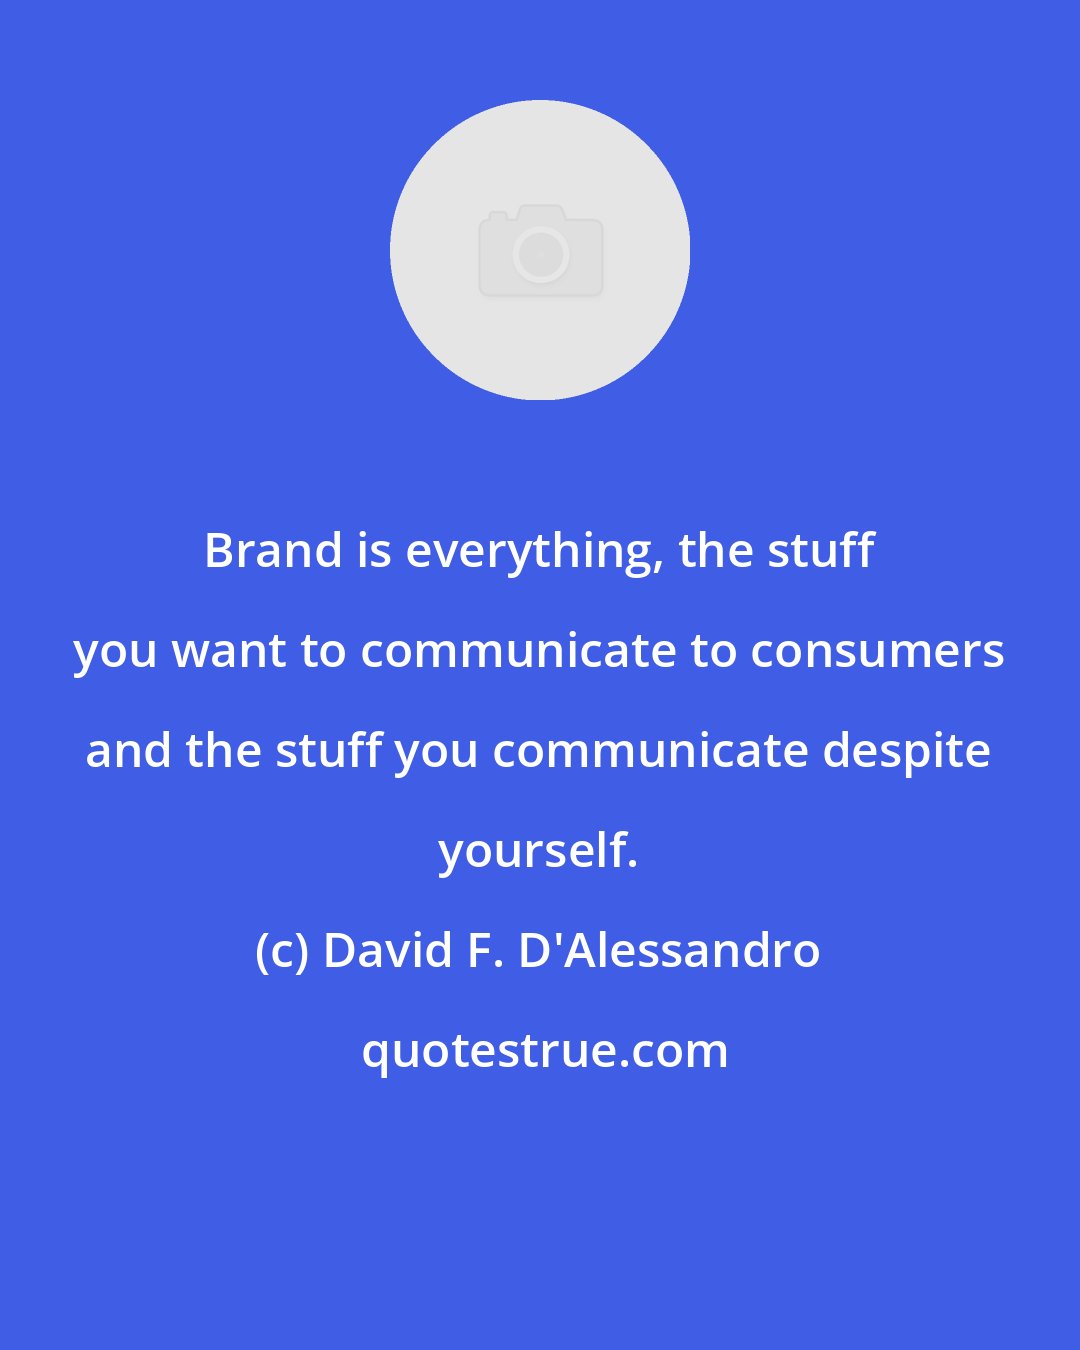 David F. D'Alessandro: Brand is everything, the stuff you want to communicate to consumers and the stuff you communicate despite yourself.